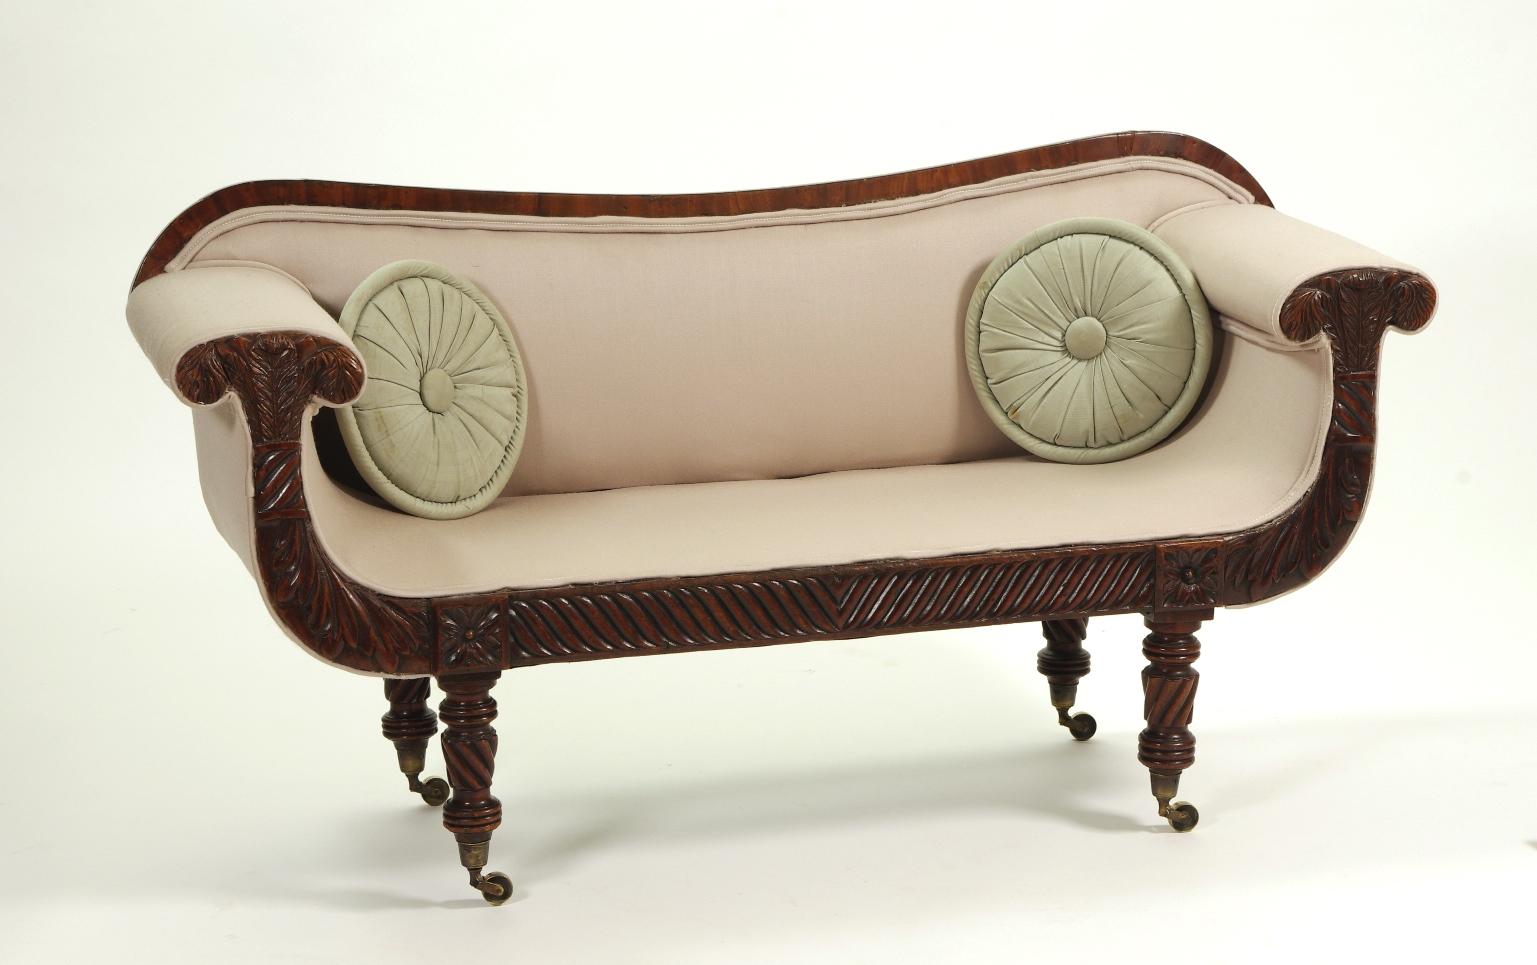 Regency Mahogany Child's Sofa, c. 1820 In Excellent Condition For Sale In St. Louis, MO